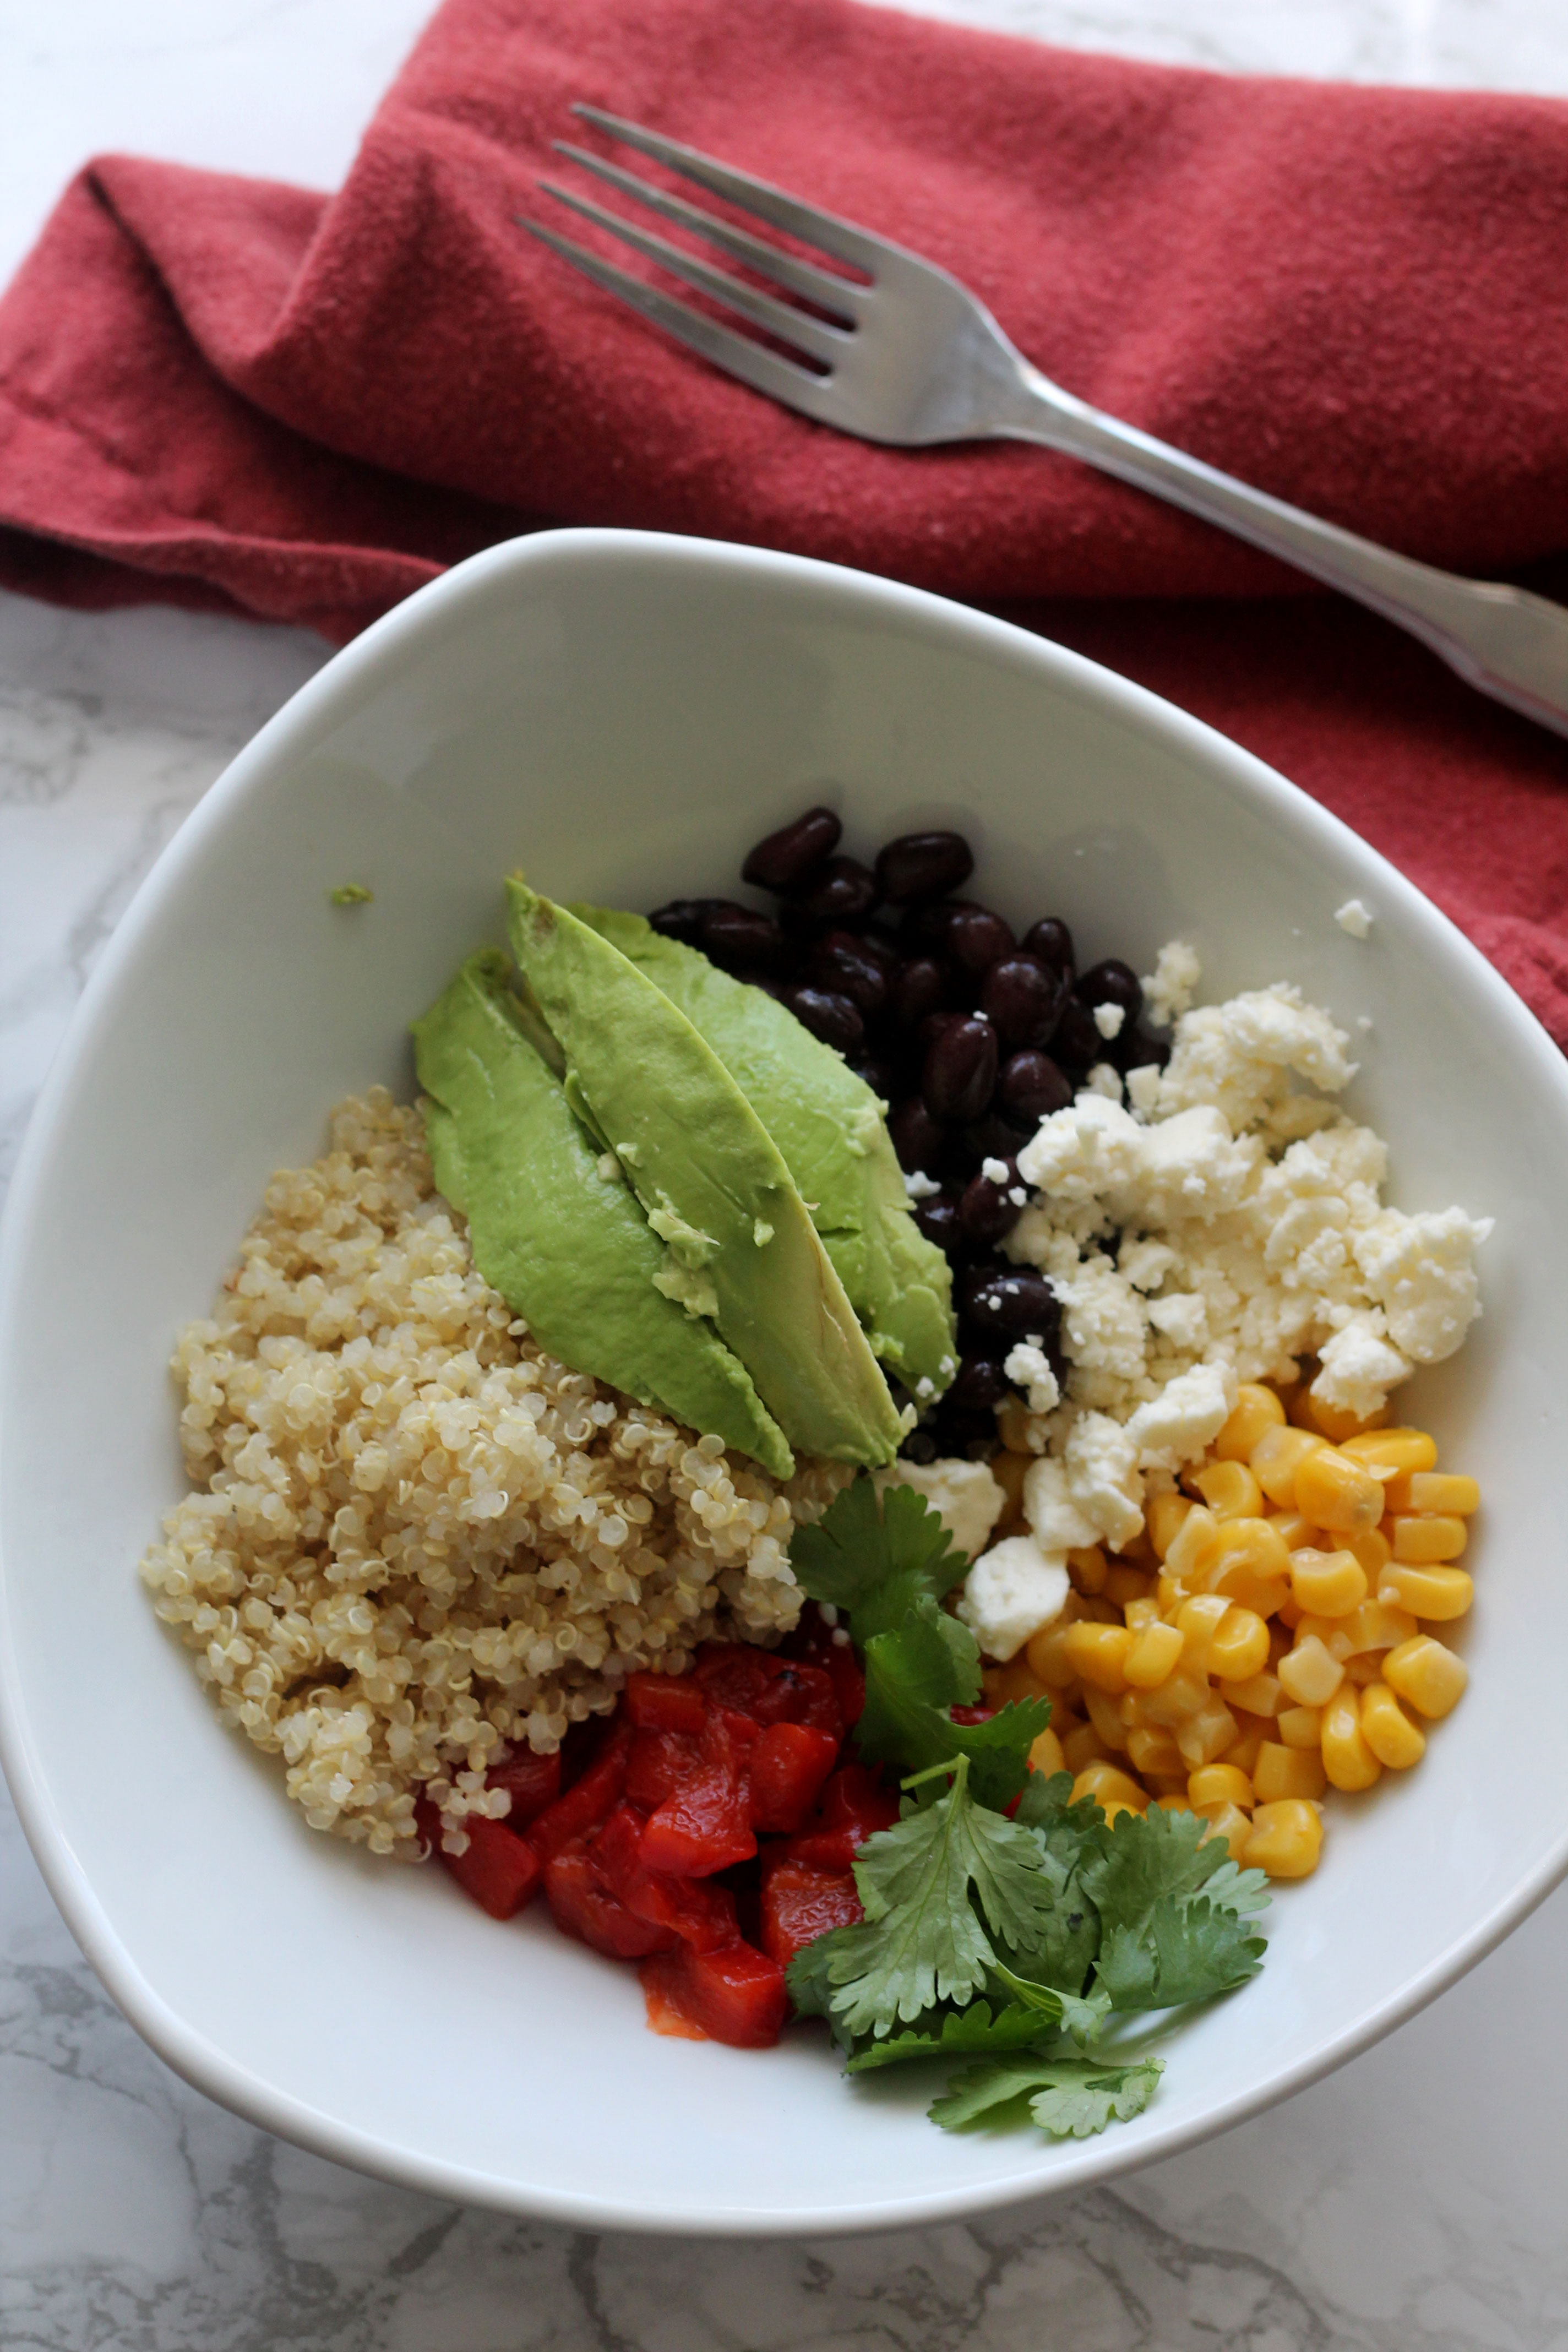 Southwestern Quinoa Bowl | A delicious, filling, meatless meal that will please both vegetarians and meat lovers!